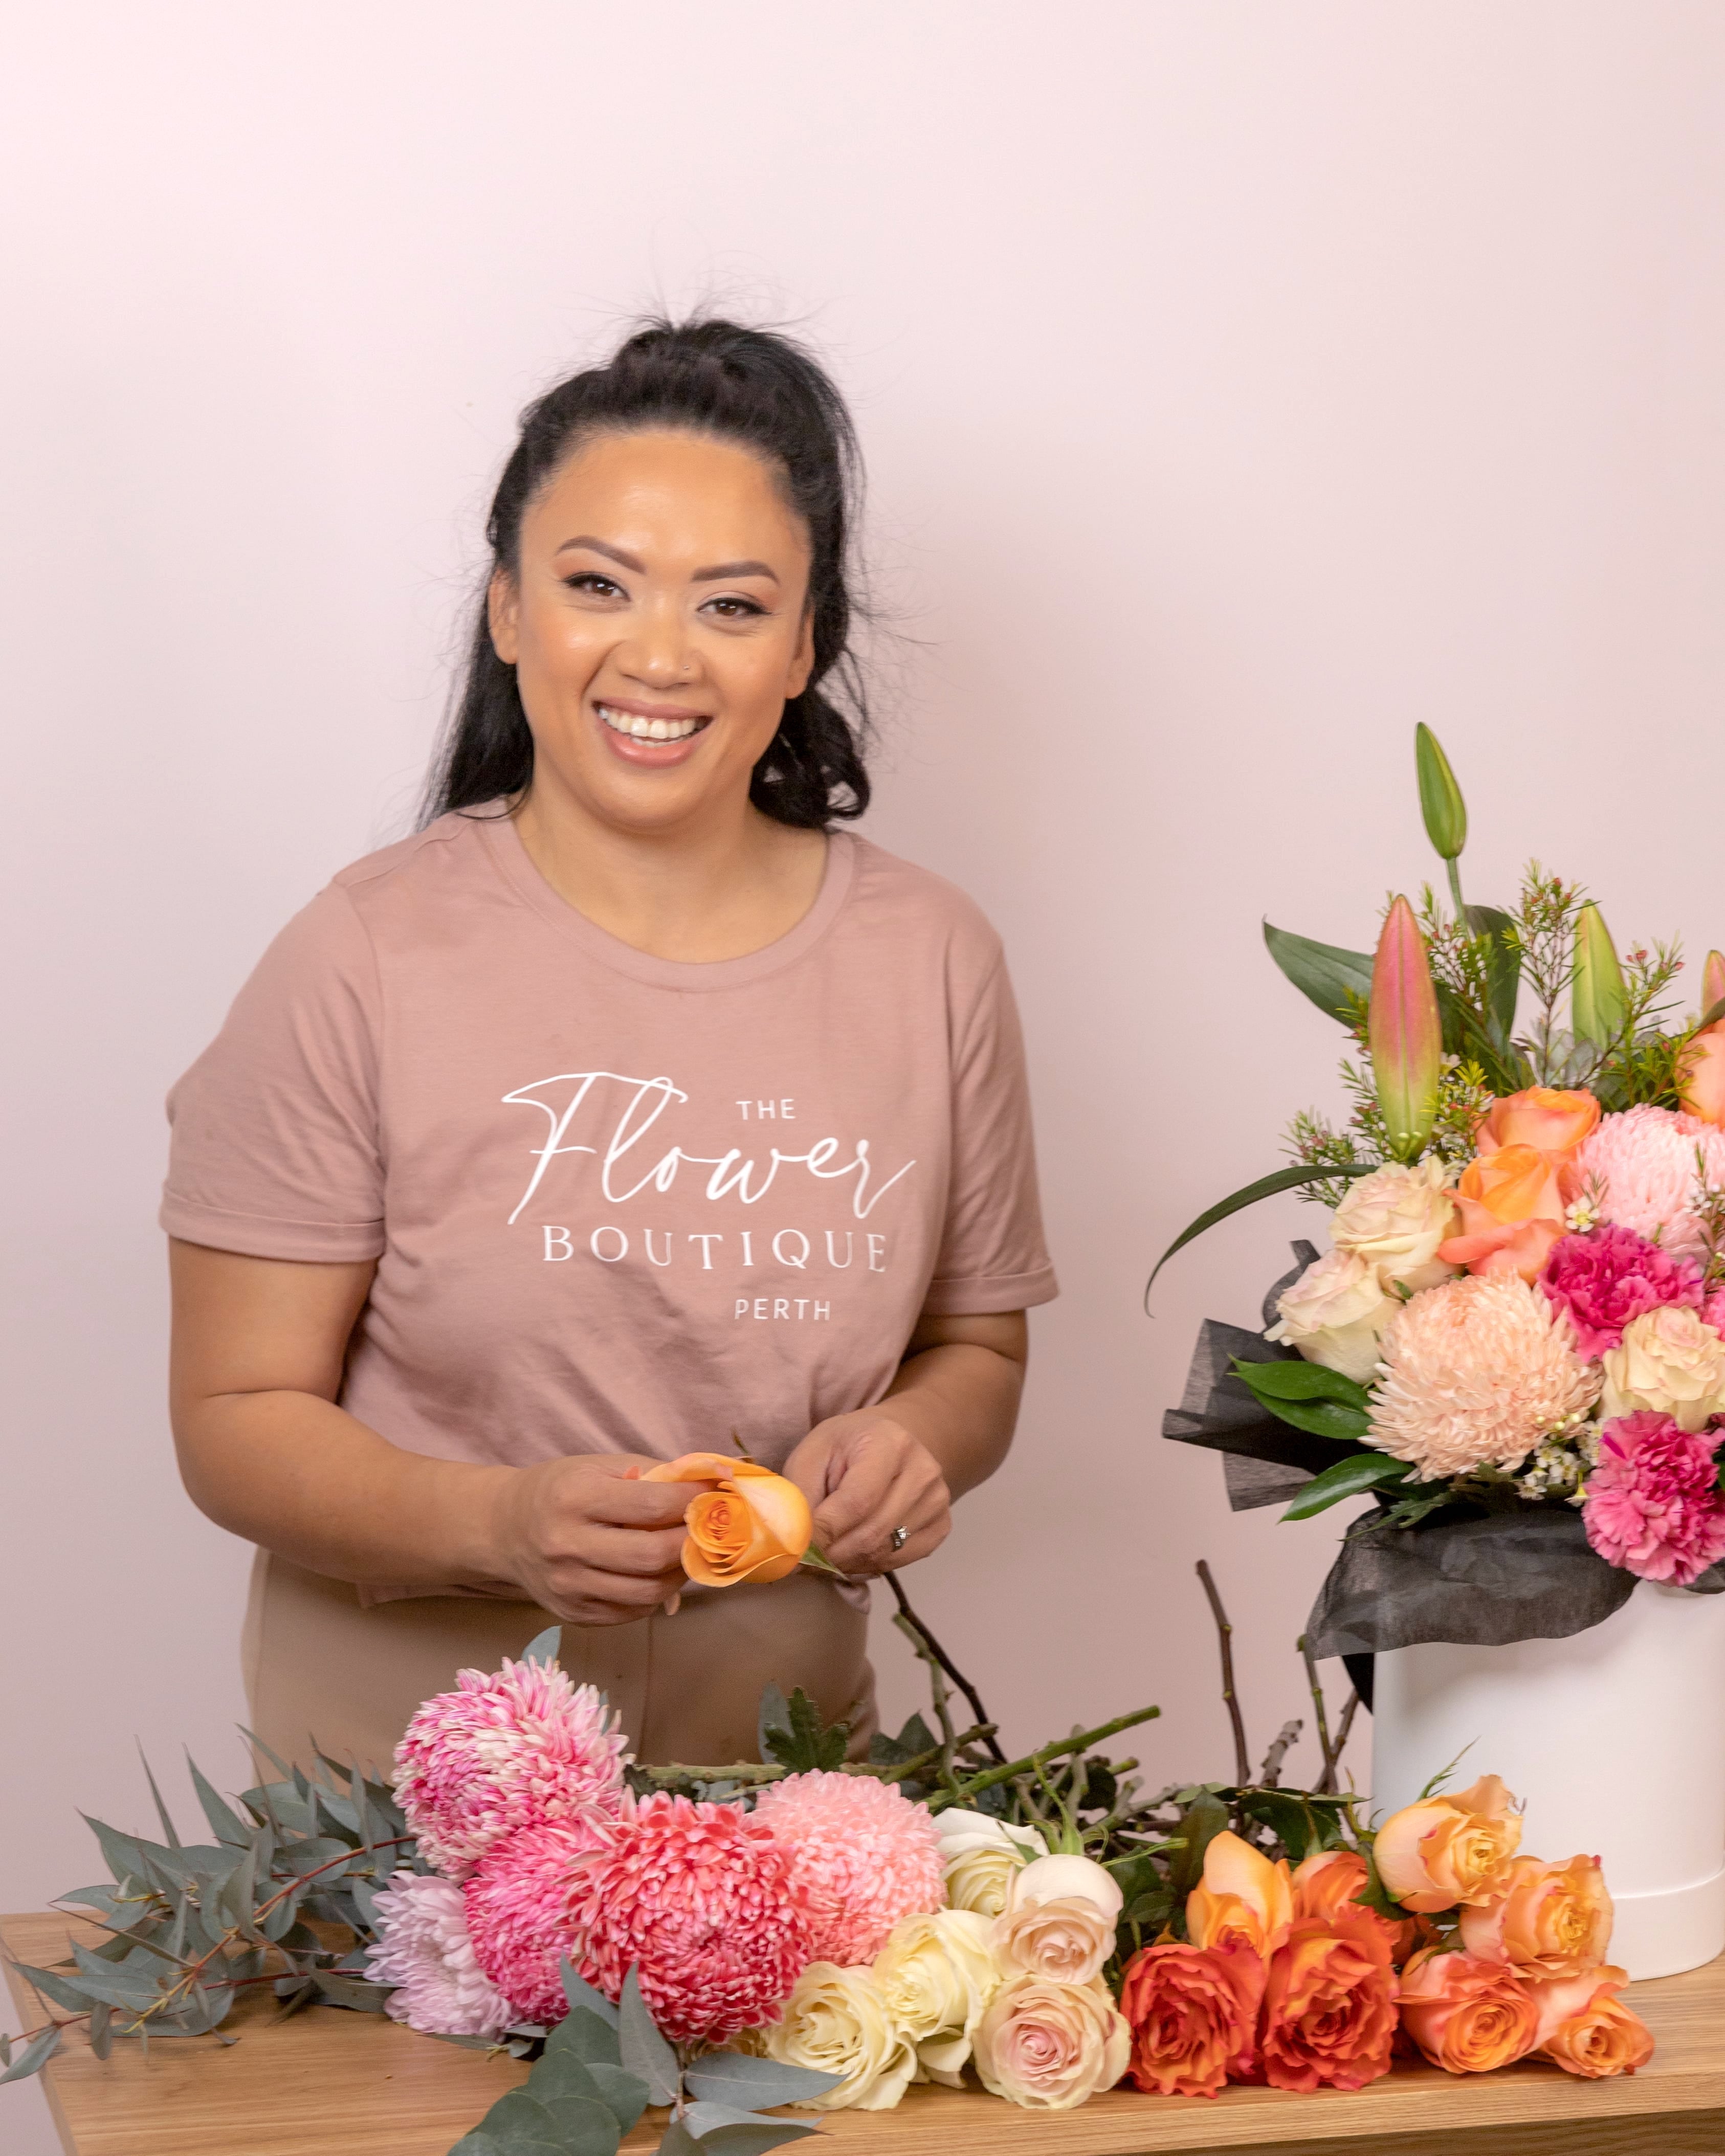 Riana Bertolami owner of The Flower Boutique creating Flowers non a table in her local florist shop. Riana offers all kinds of floral services including Perth Flower Delivery, Box of flowers, bouquets, dried arrangements, events and wedding flowers